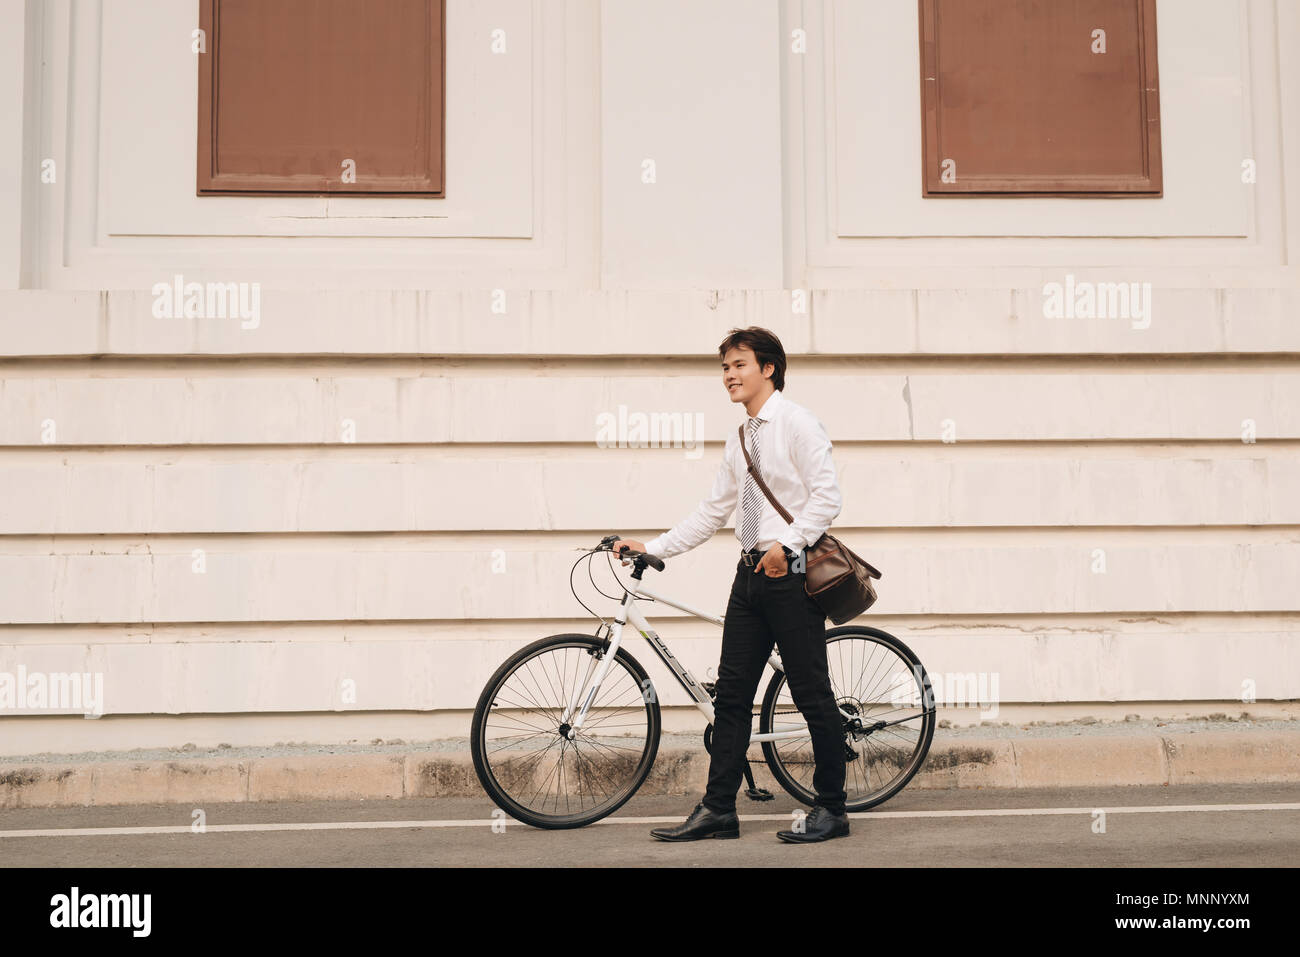 Outdoor portrait of handsome young man with fixed gear bicycle in the street. Stock Photo